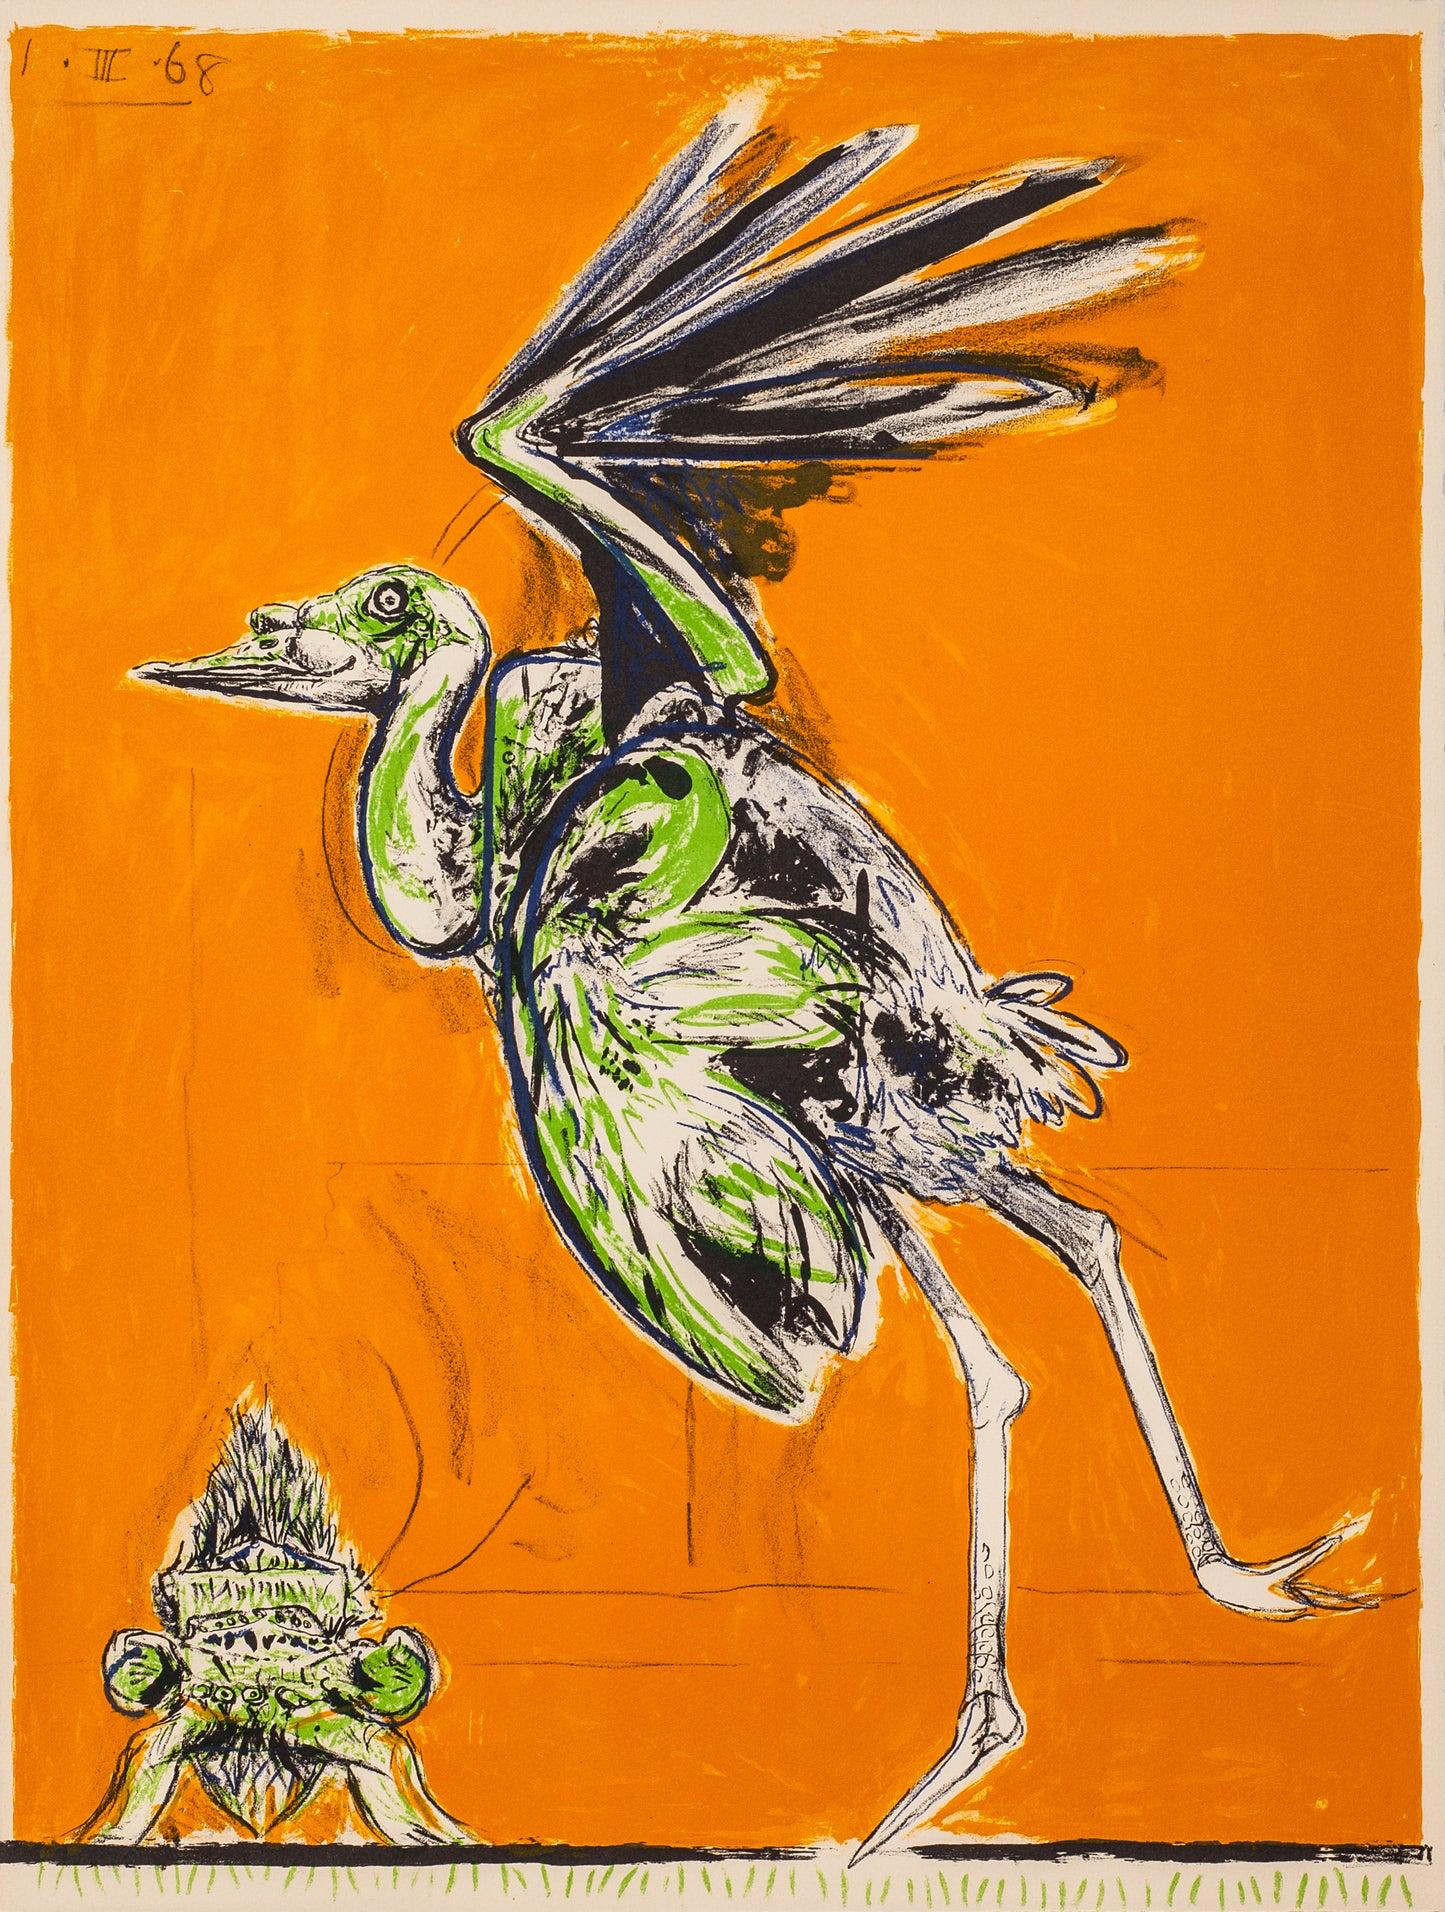 Artist: Graham Sutherland 

Medium: Original Lithograph, From the portfolio A Bestiary and Some Correspondences, 1968

Dimensions: 26 x 20 in, 66 x 50.8 cm